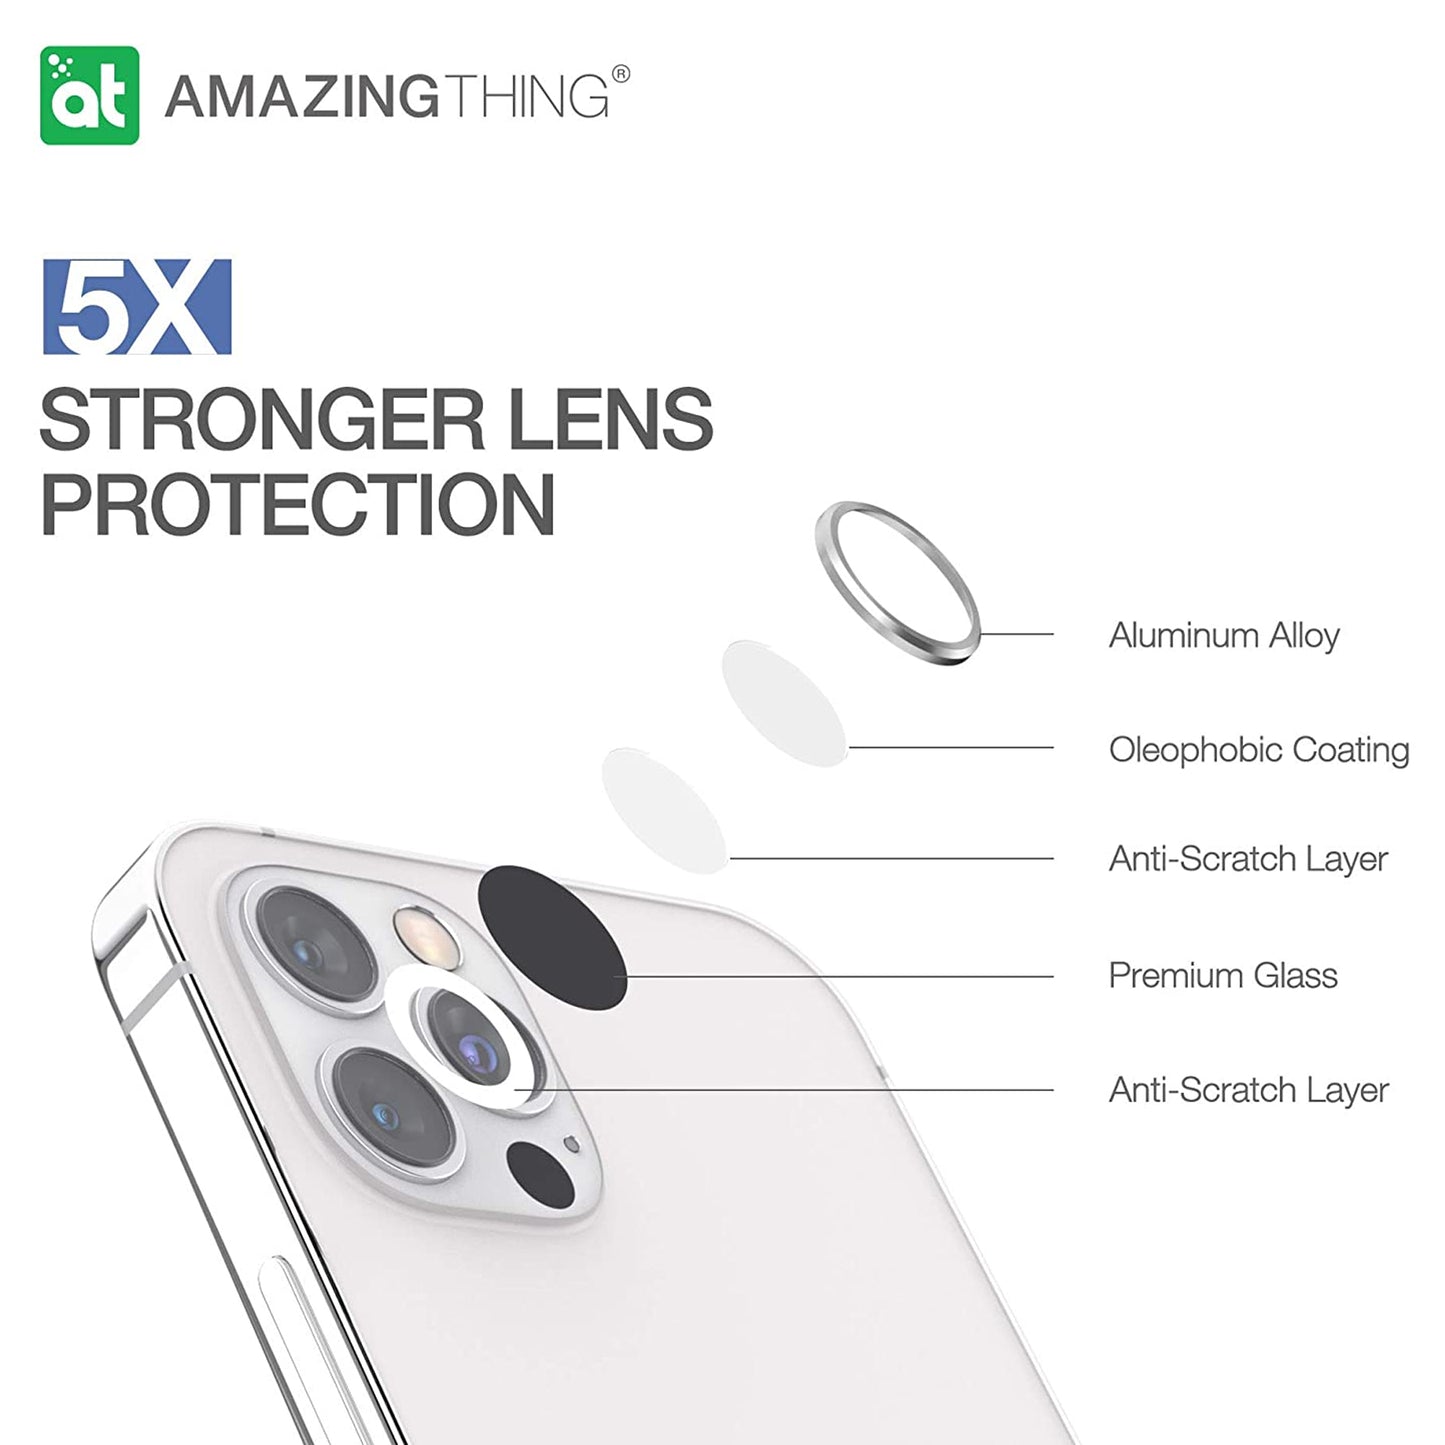 AMAZINGthing SUPREME AR 3D LensGlass Protector for iPhone 13 Pro 6.1" 5G ( Three Lens ) - Gray (Barcode: 4892878069496 )